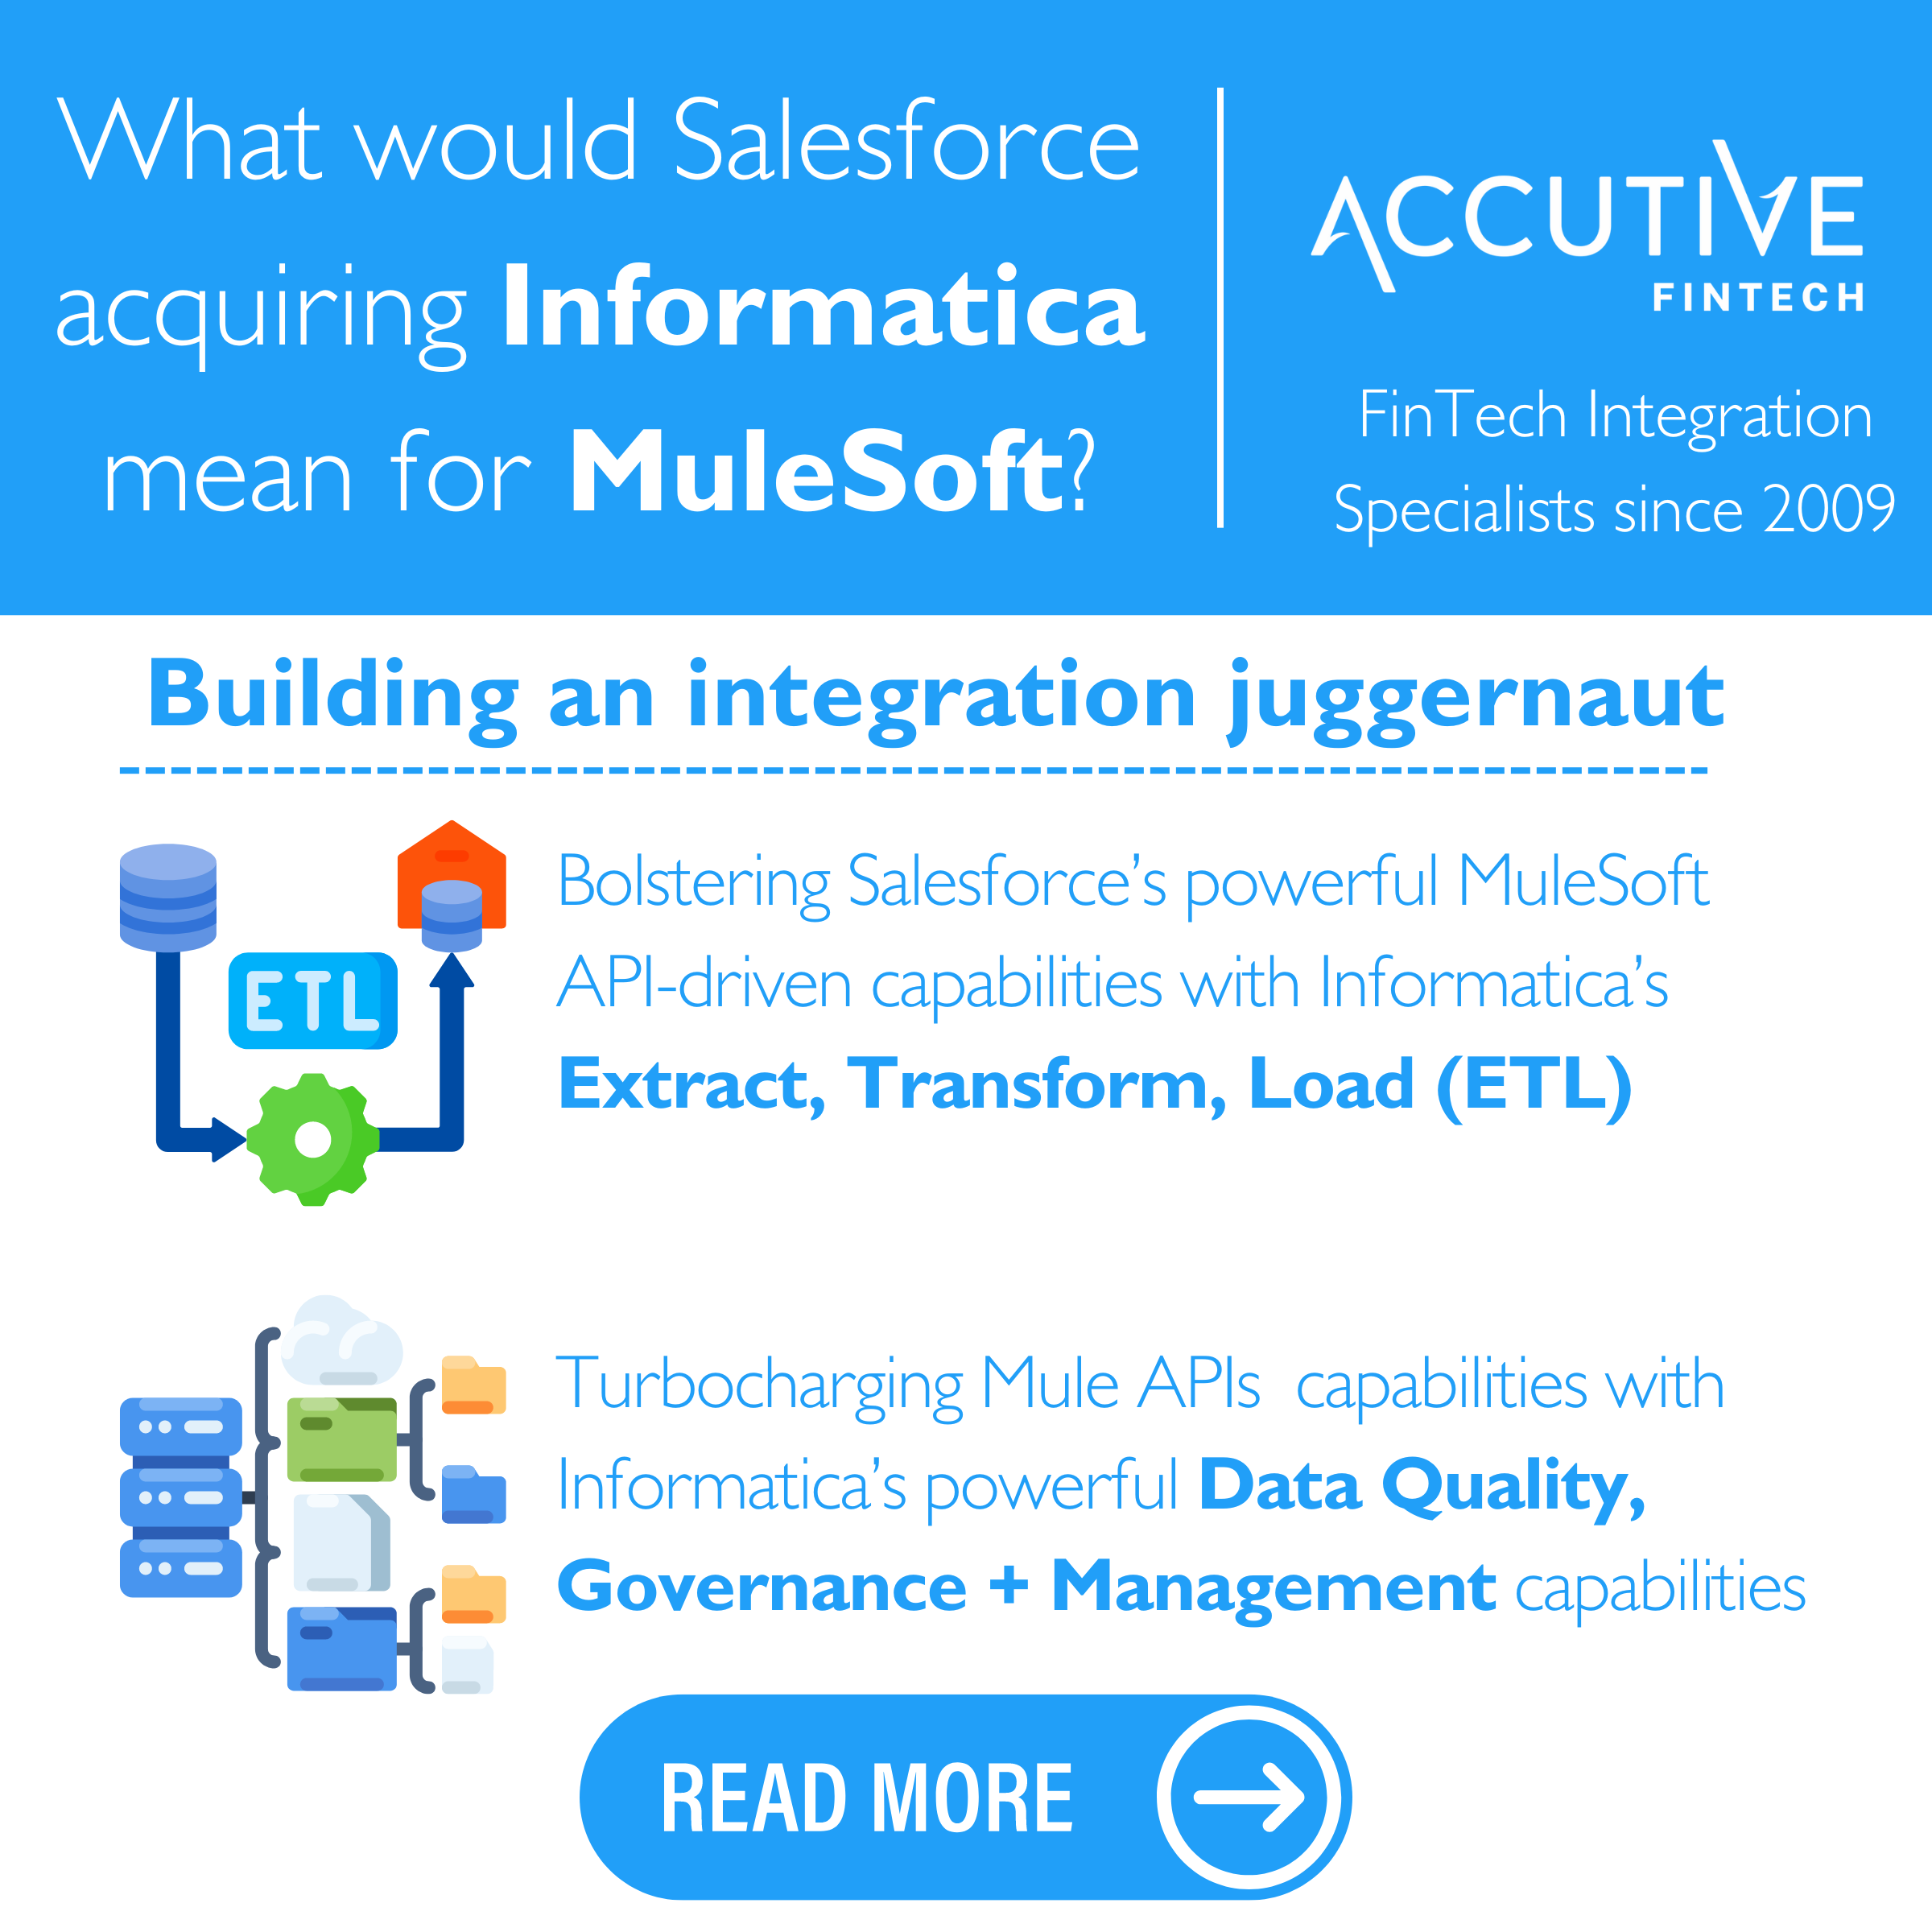 Implications of potential Salesforce acquisition of Informatica for MuleSoft platform